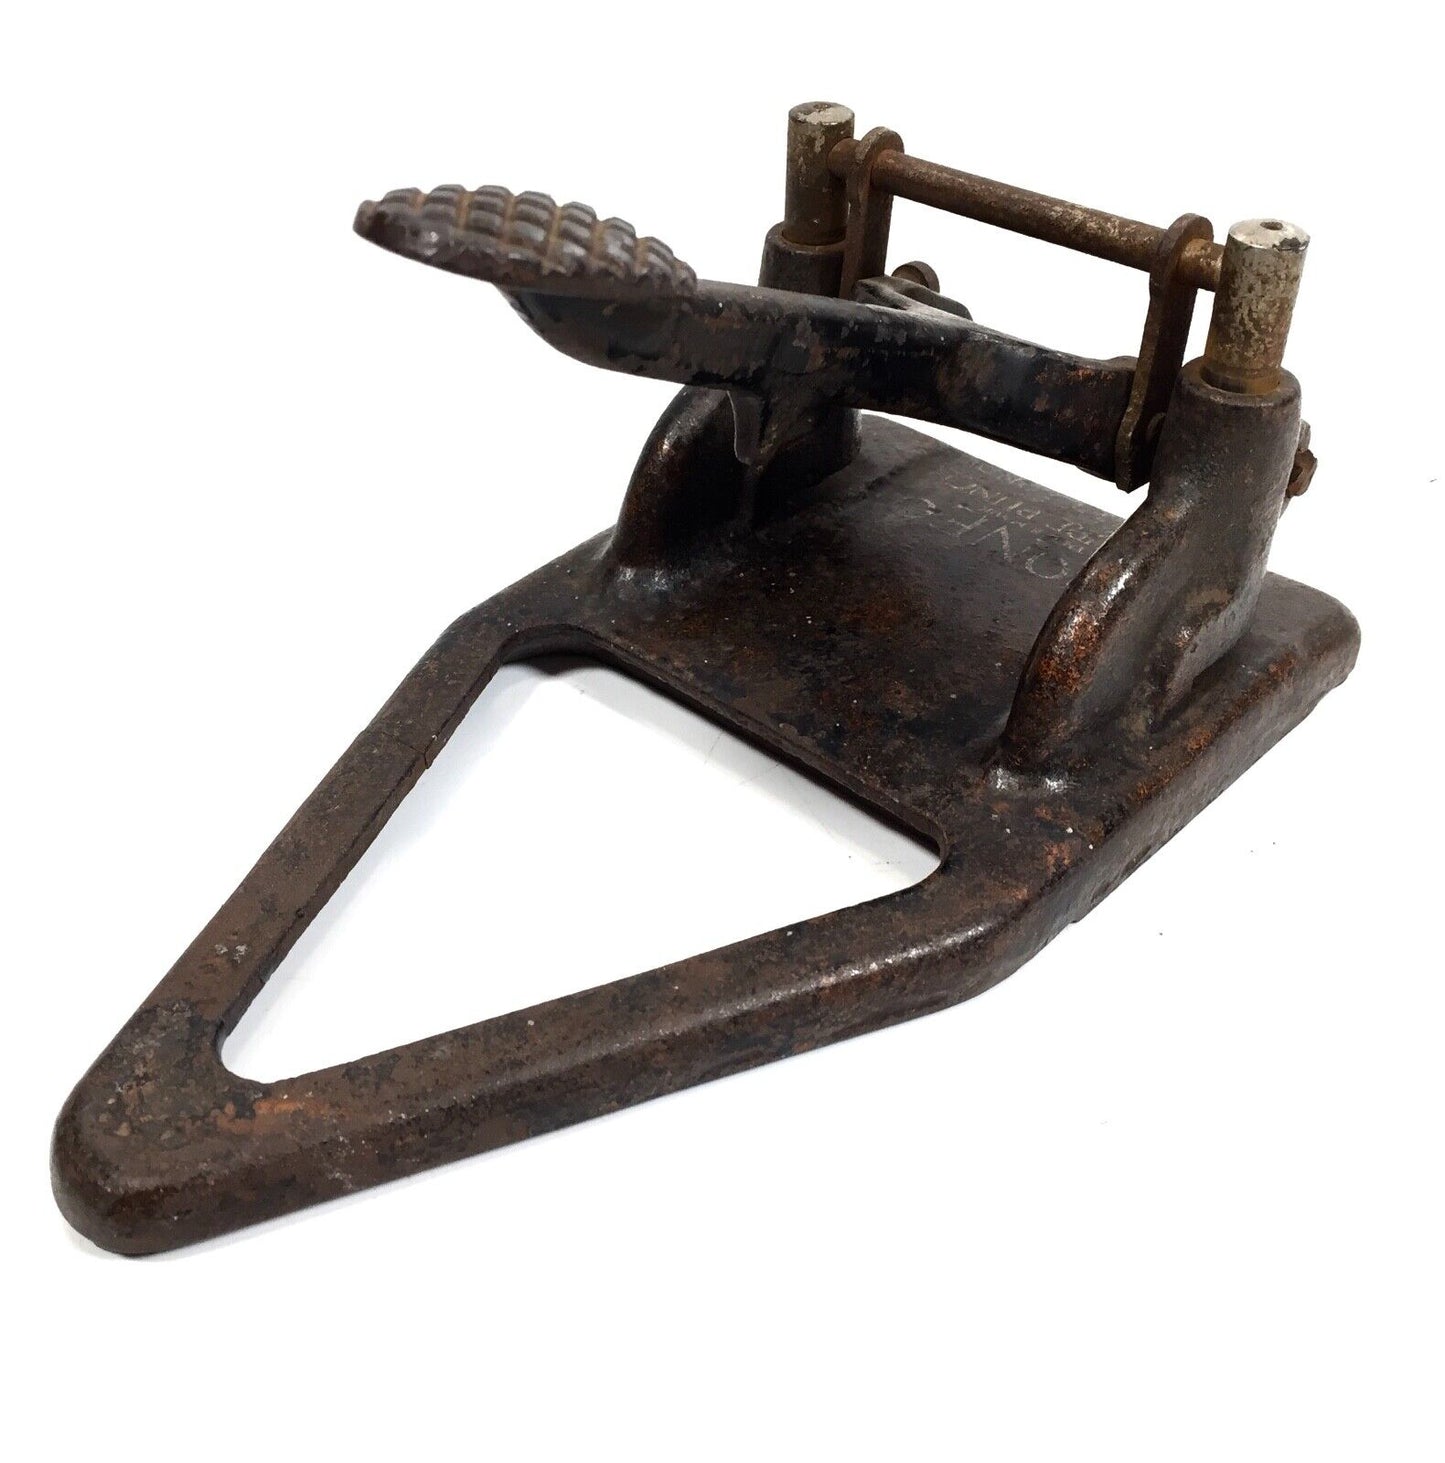 Antique Industrial Hole Punch / Heavy Duty Cast Iron by Roneo / Paper Puncher